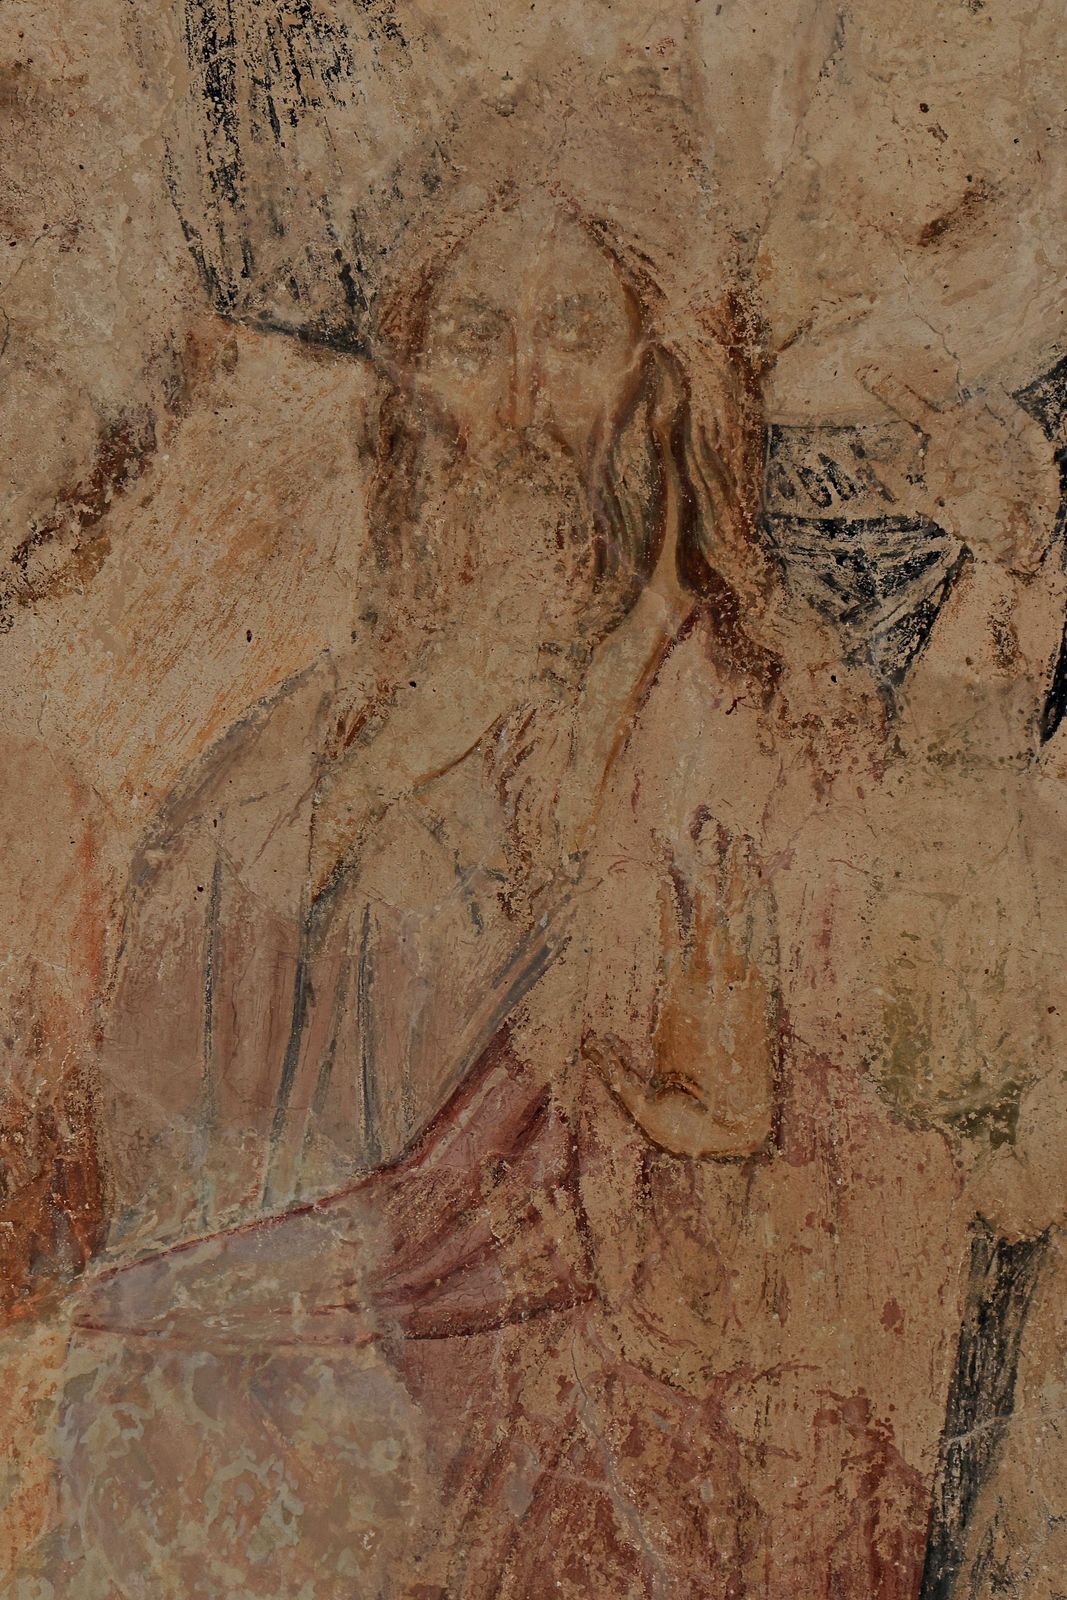 Crucifixion of Christ, detail